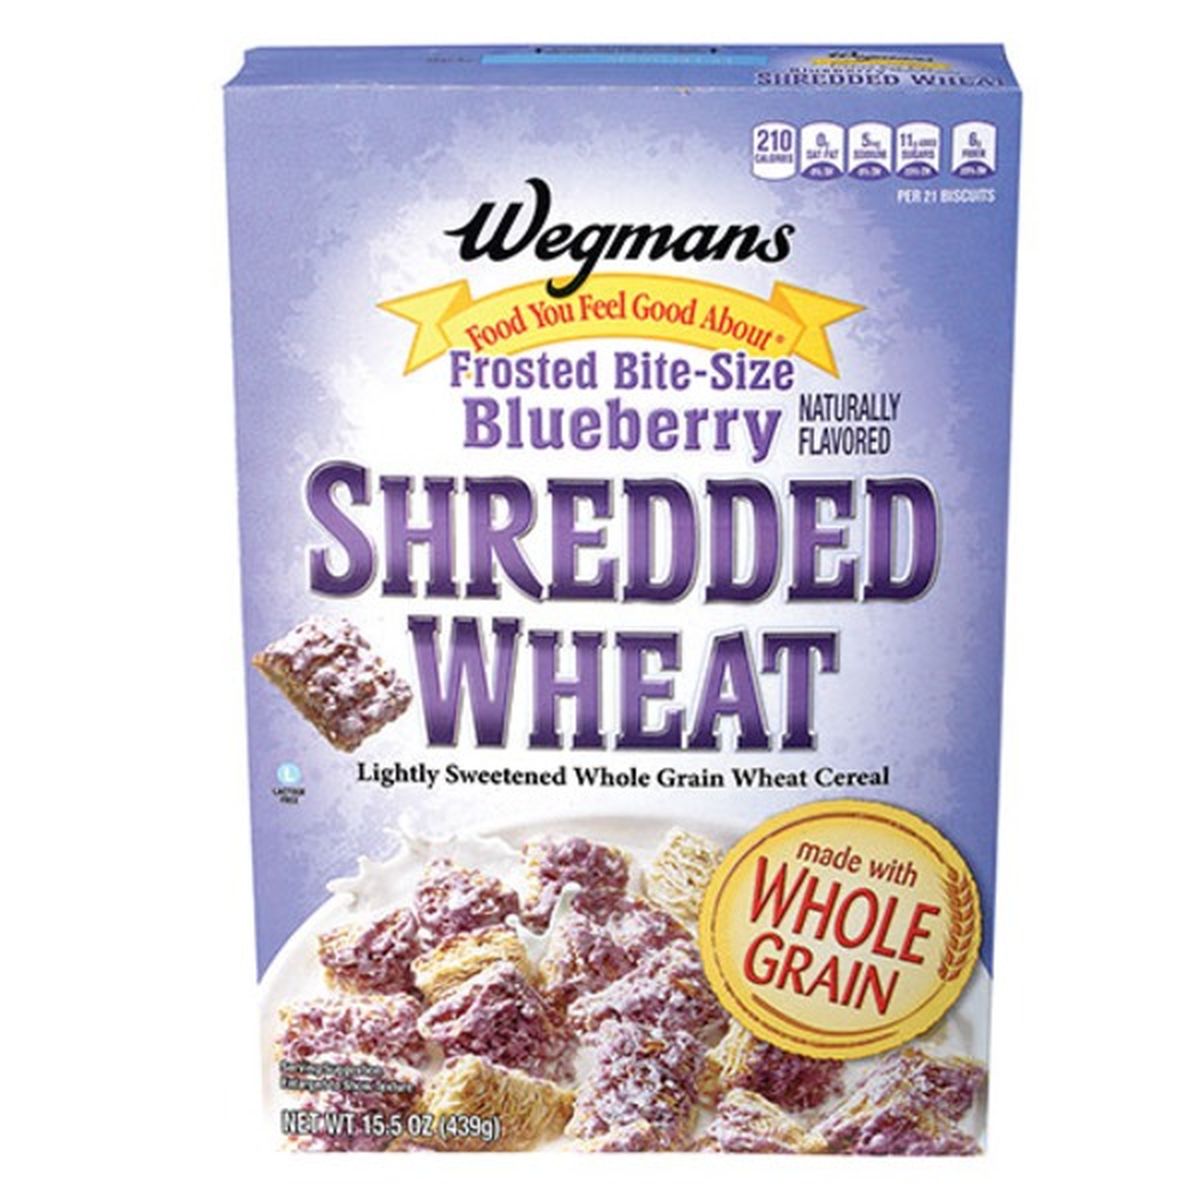 Calories in Wegmans Frosted Bite-Size Blueberry Shredded Wheat Cereal